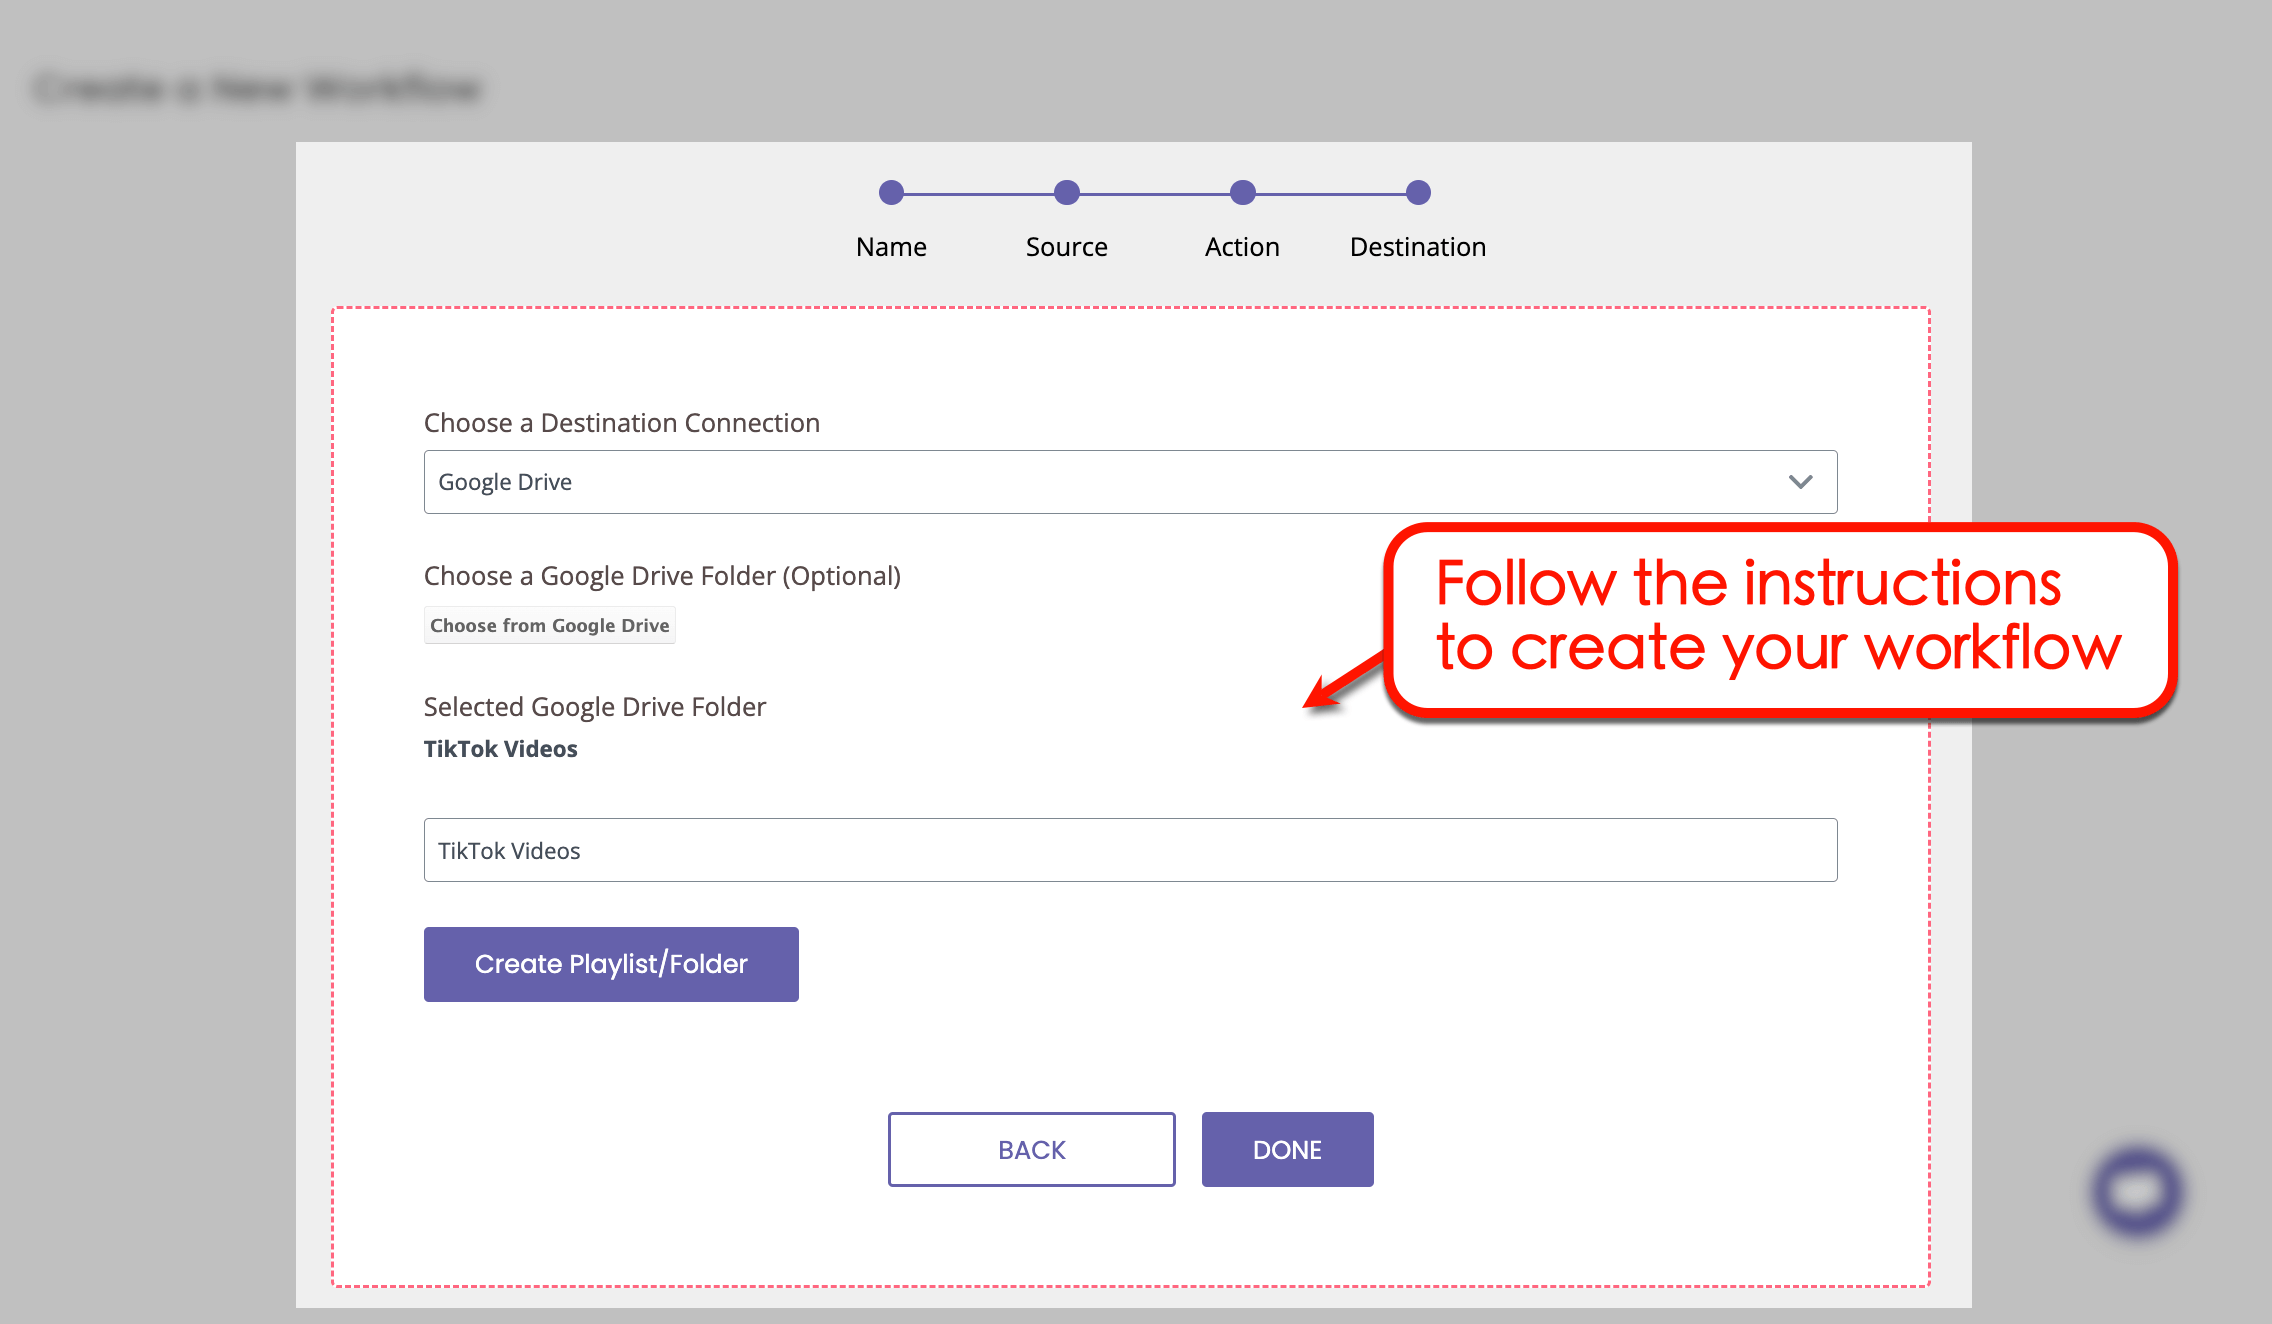 Follow the instructions to create workflow